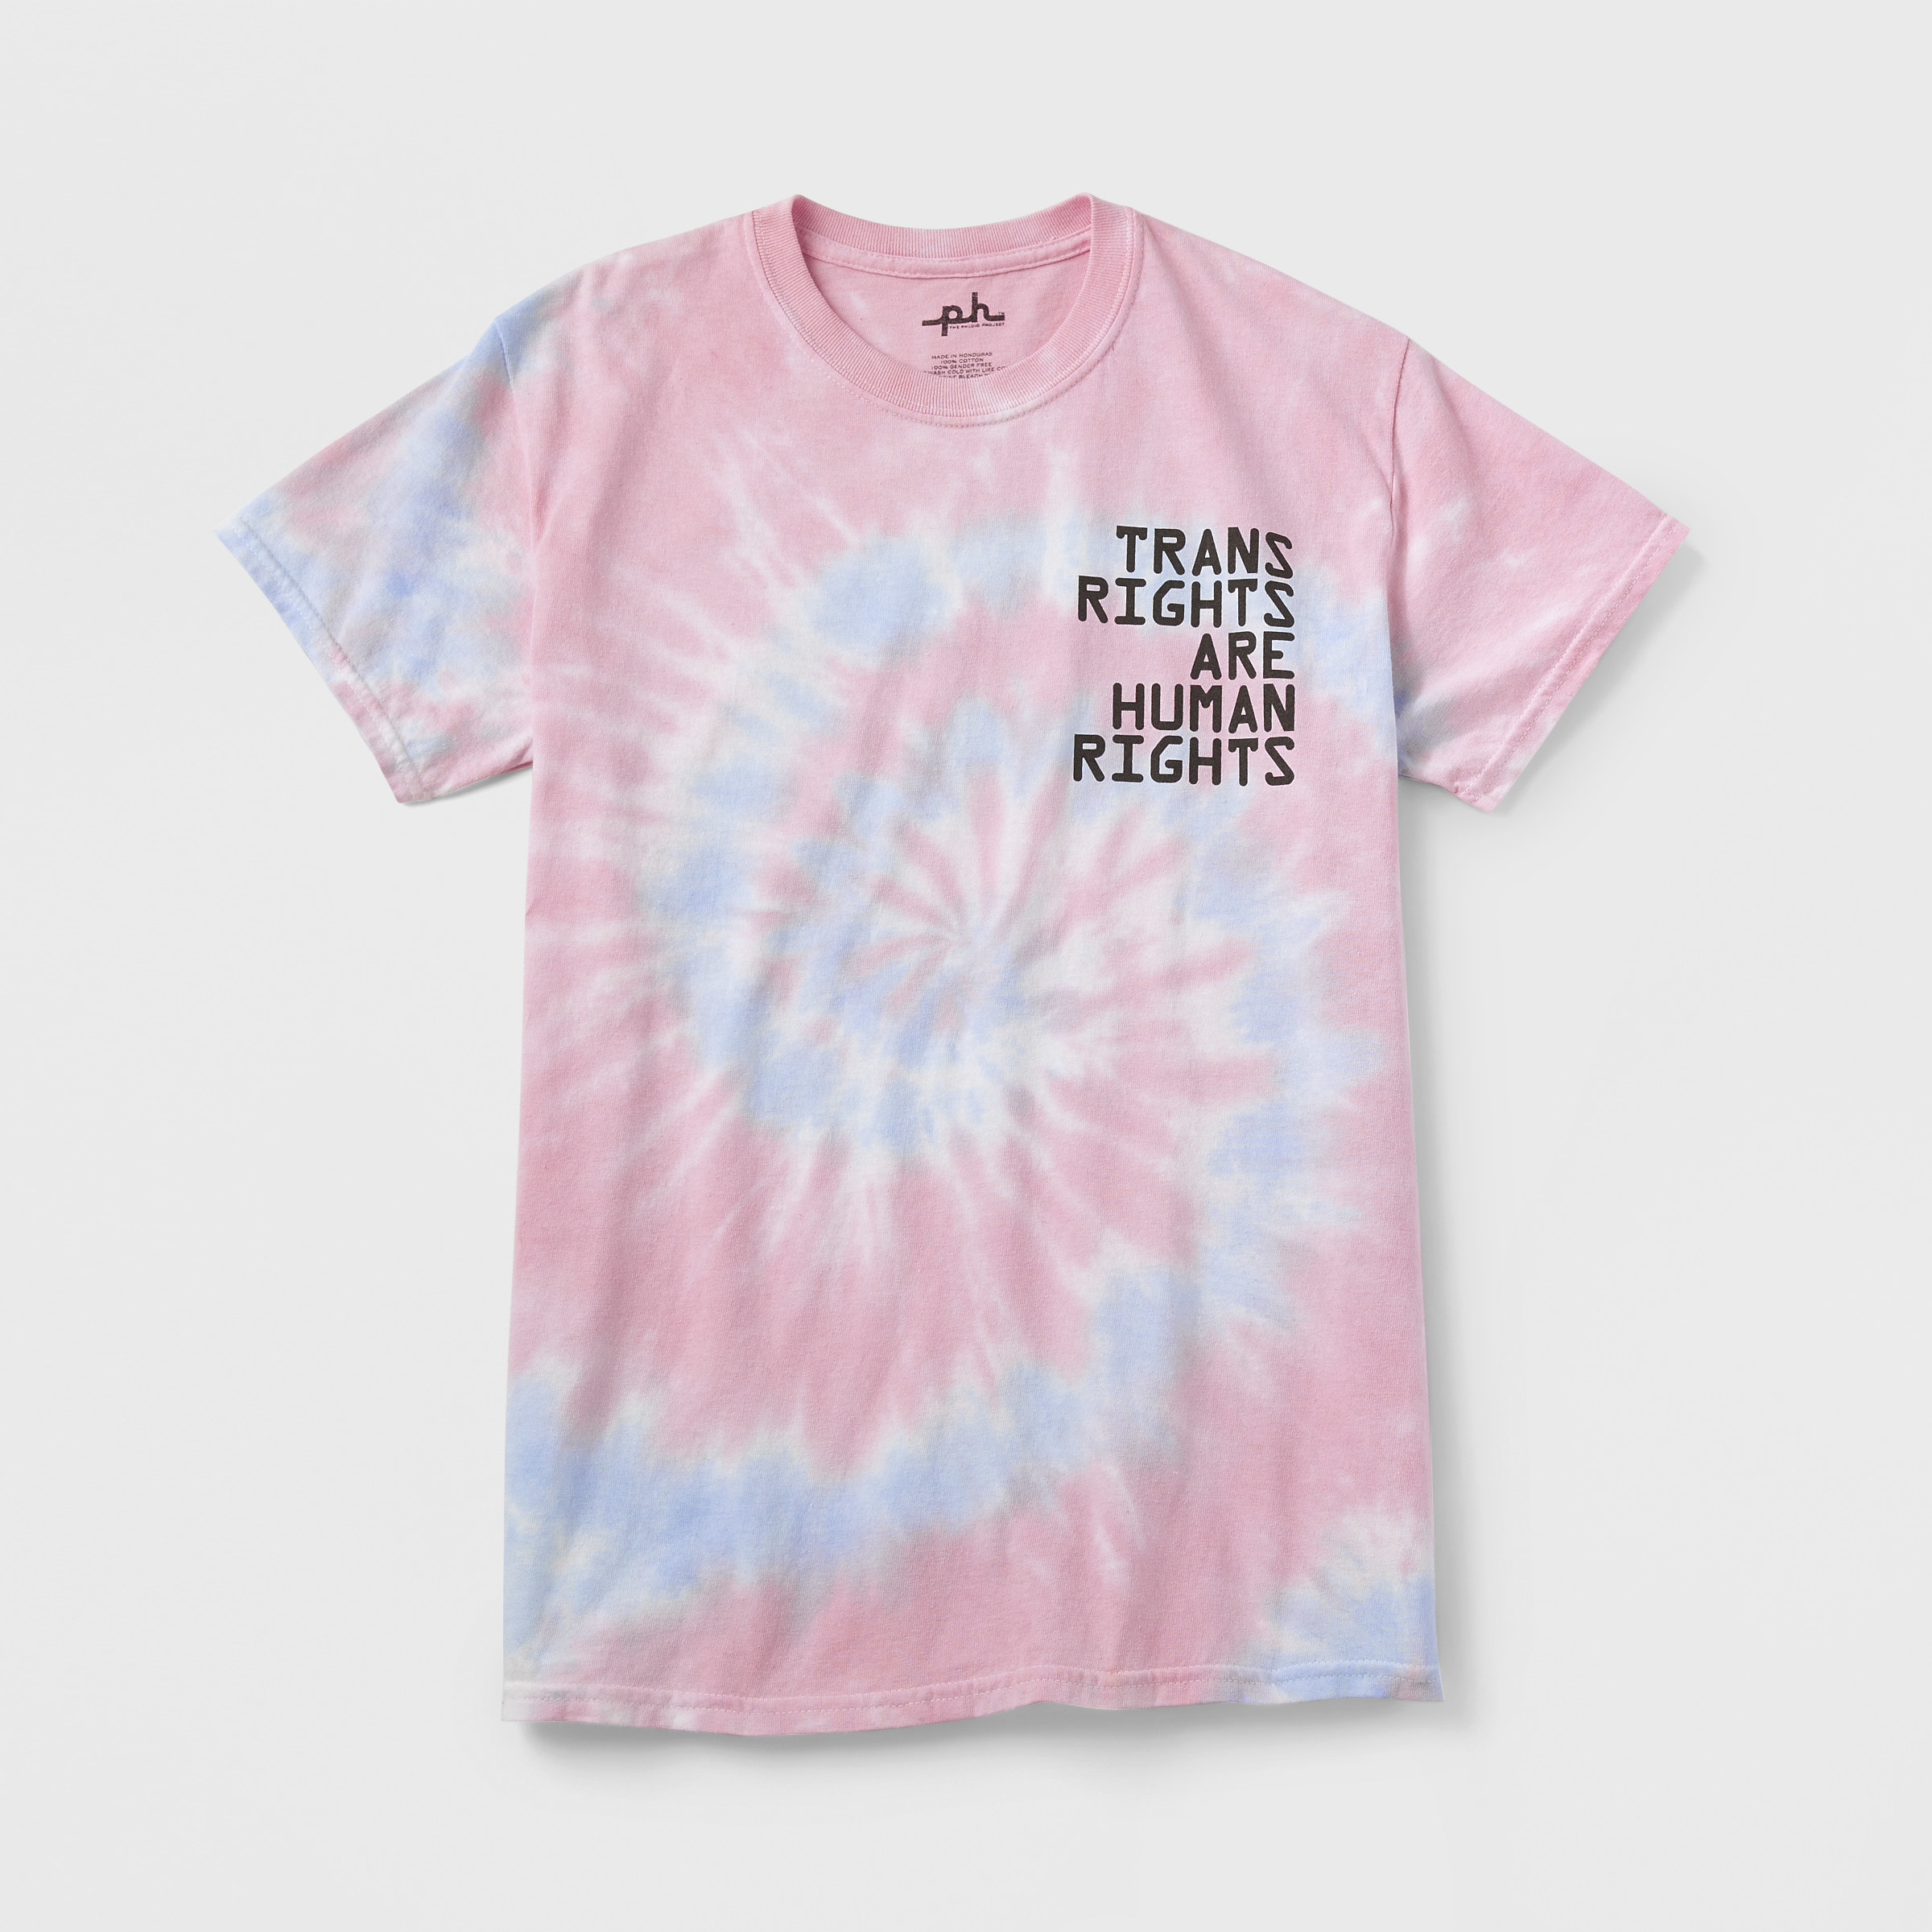 Trans Rights PHLUID Project Short Sleeve Tee with pink and blue tie-dye swirl design